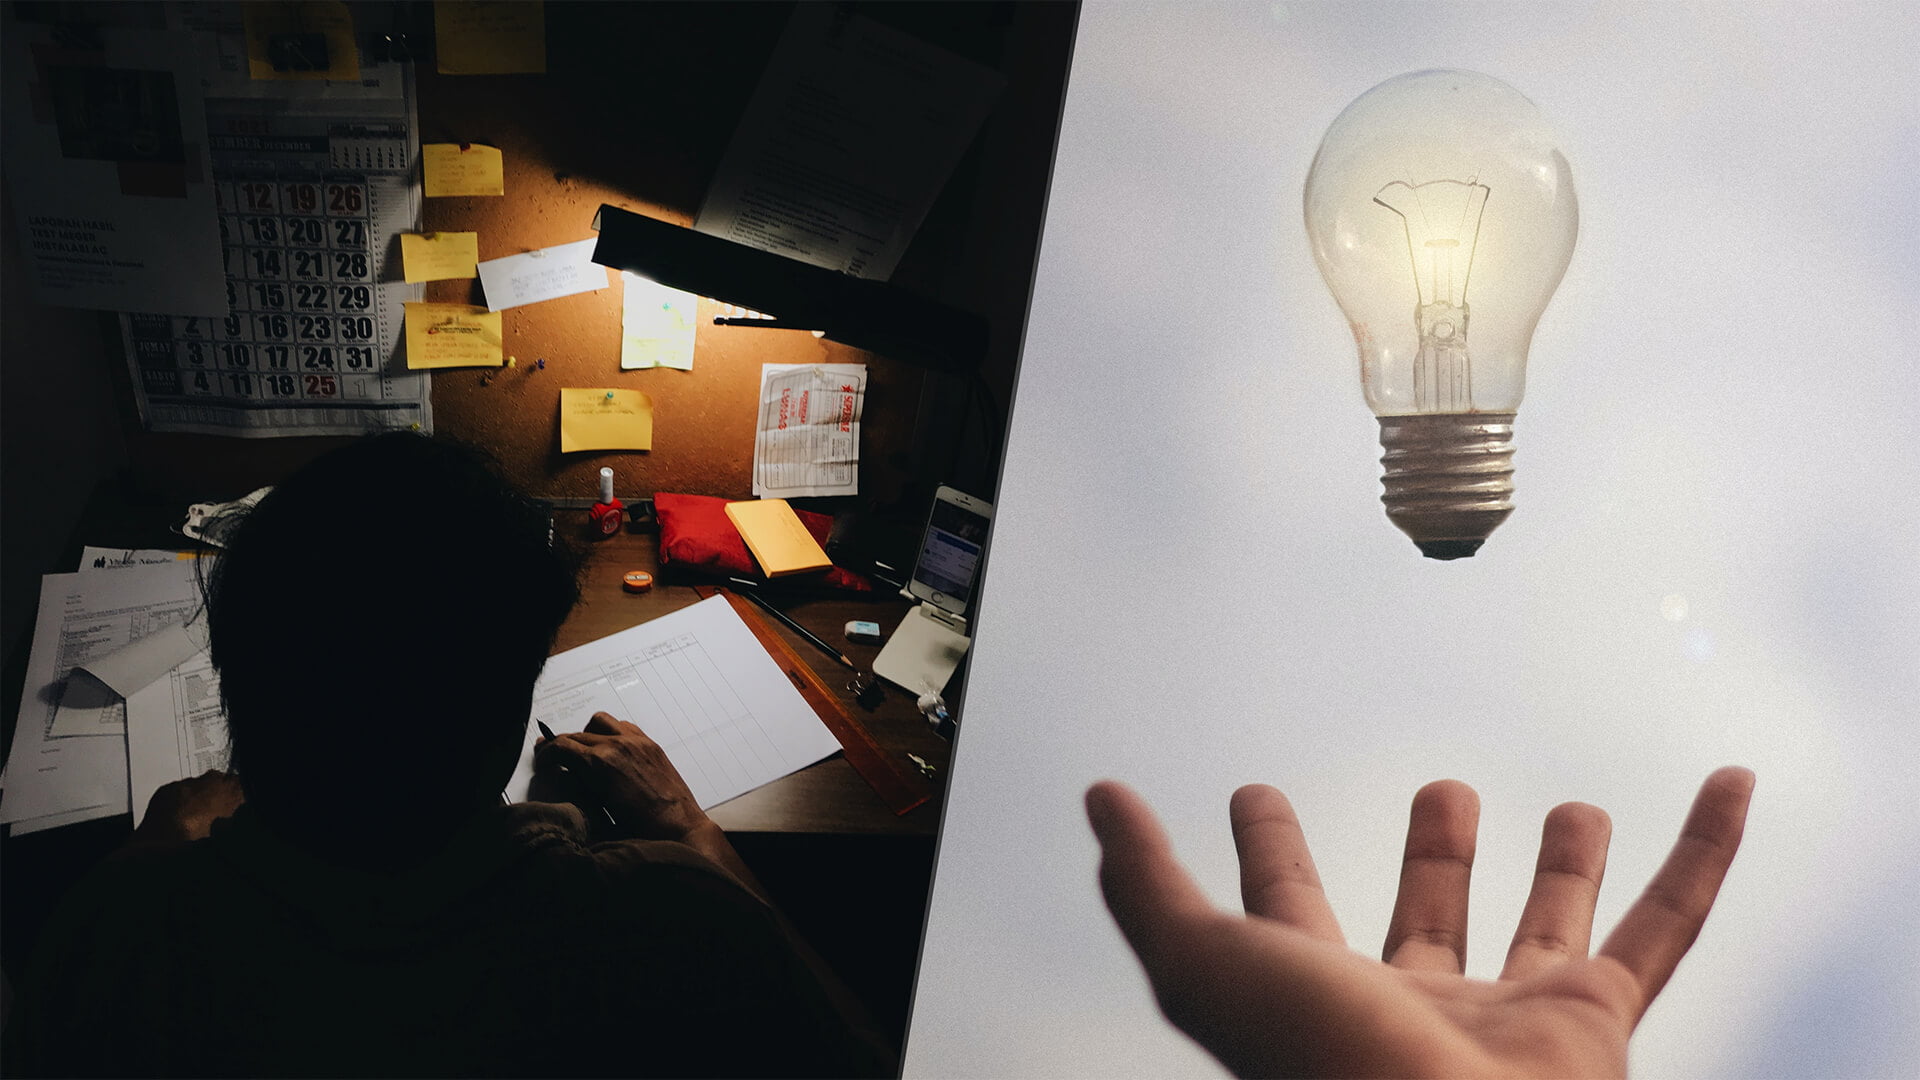 A collage with two images side-to-side showing an over-the-shoulder view of a man working late and his desk full of paperwork and a light bulb levitating above an open palm, used here as a metaphor that you should respect the work that you have done and value it when you are exchanging with a client for profit.